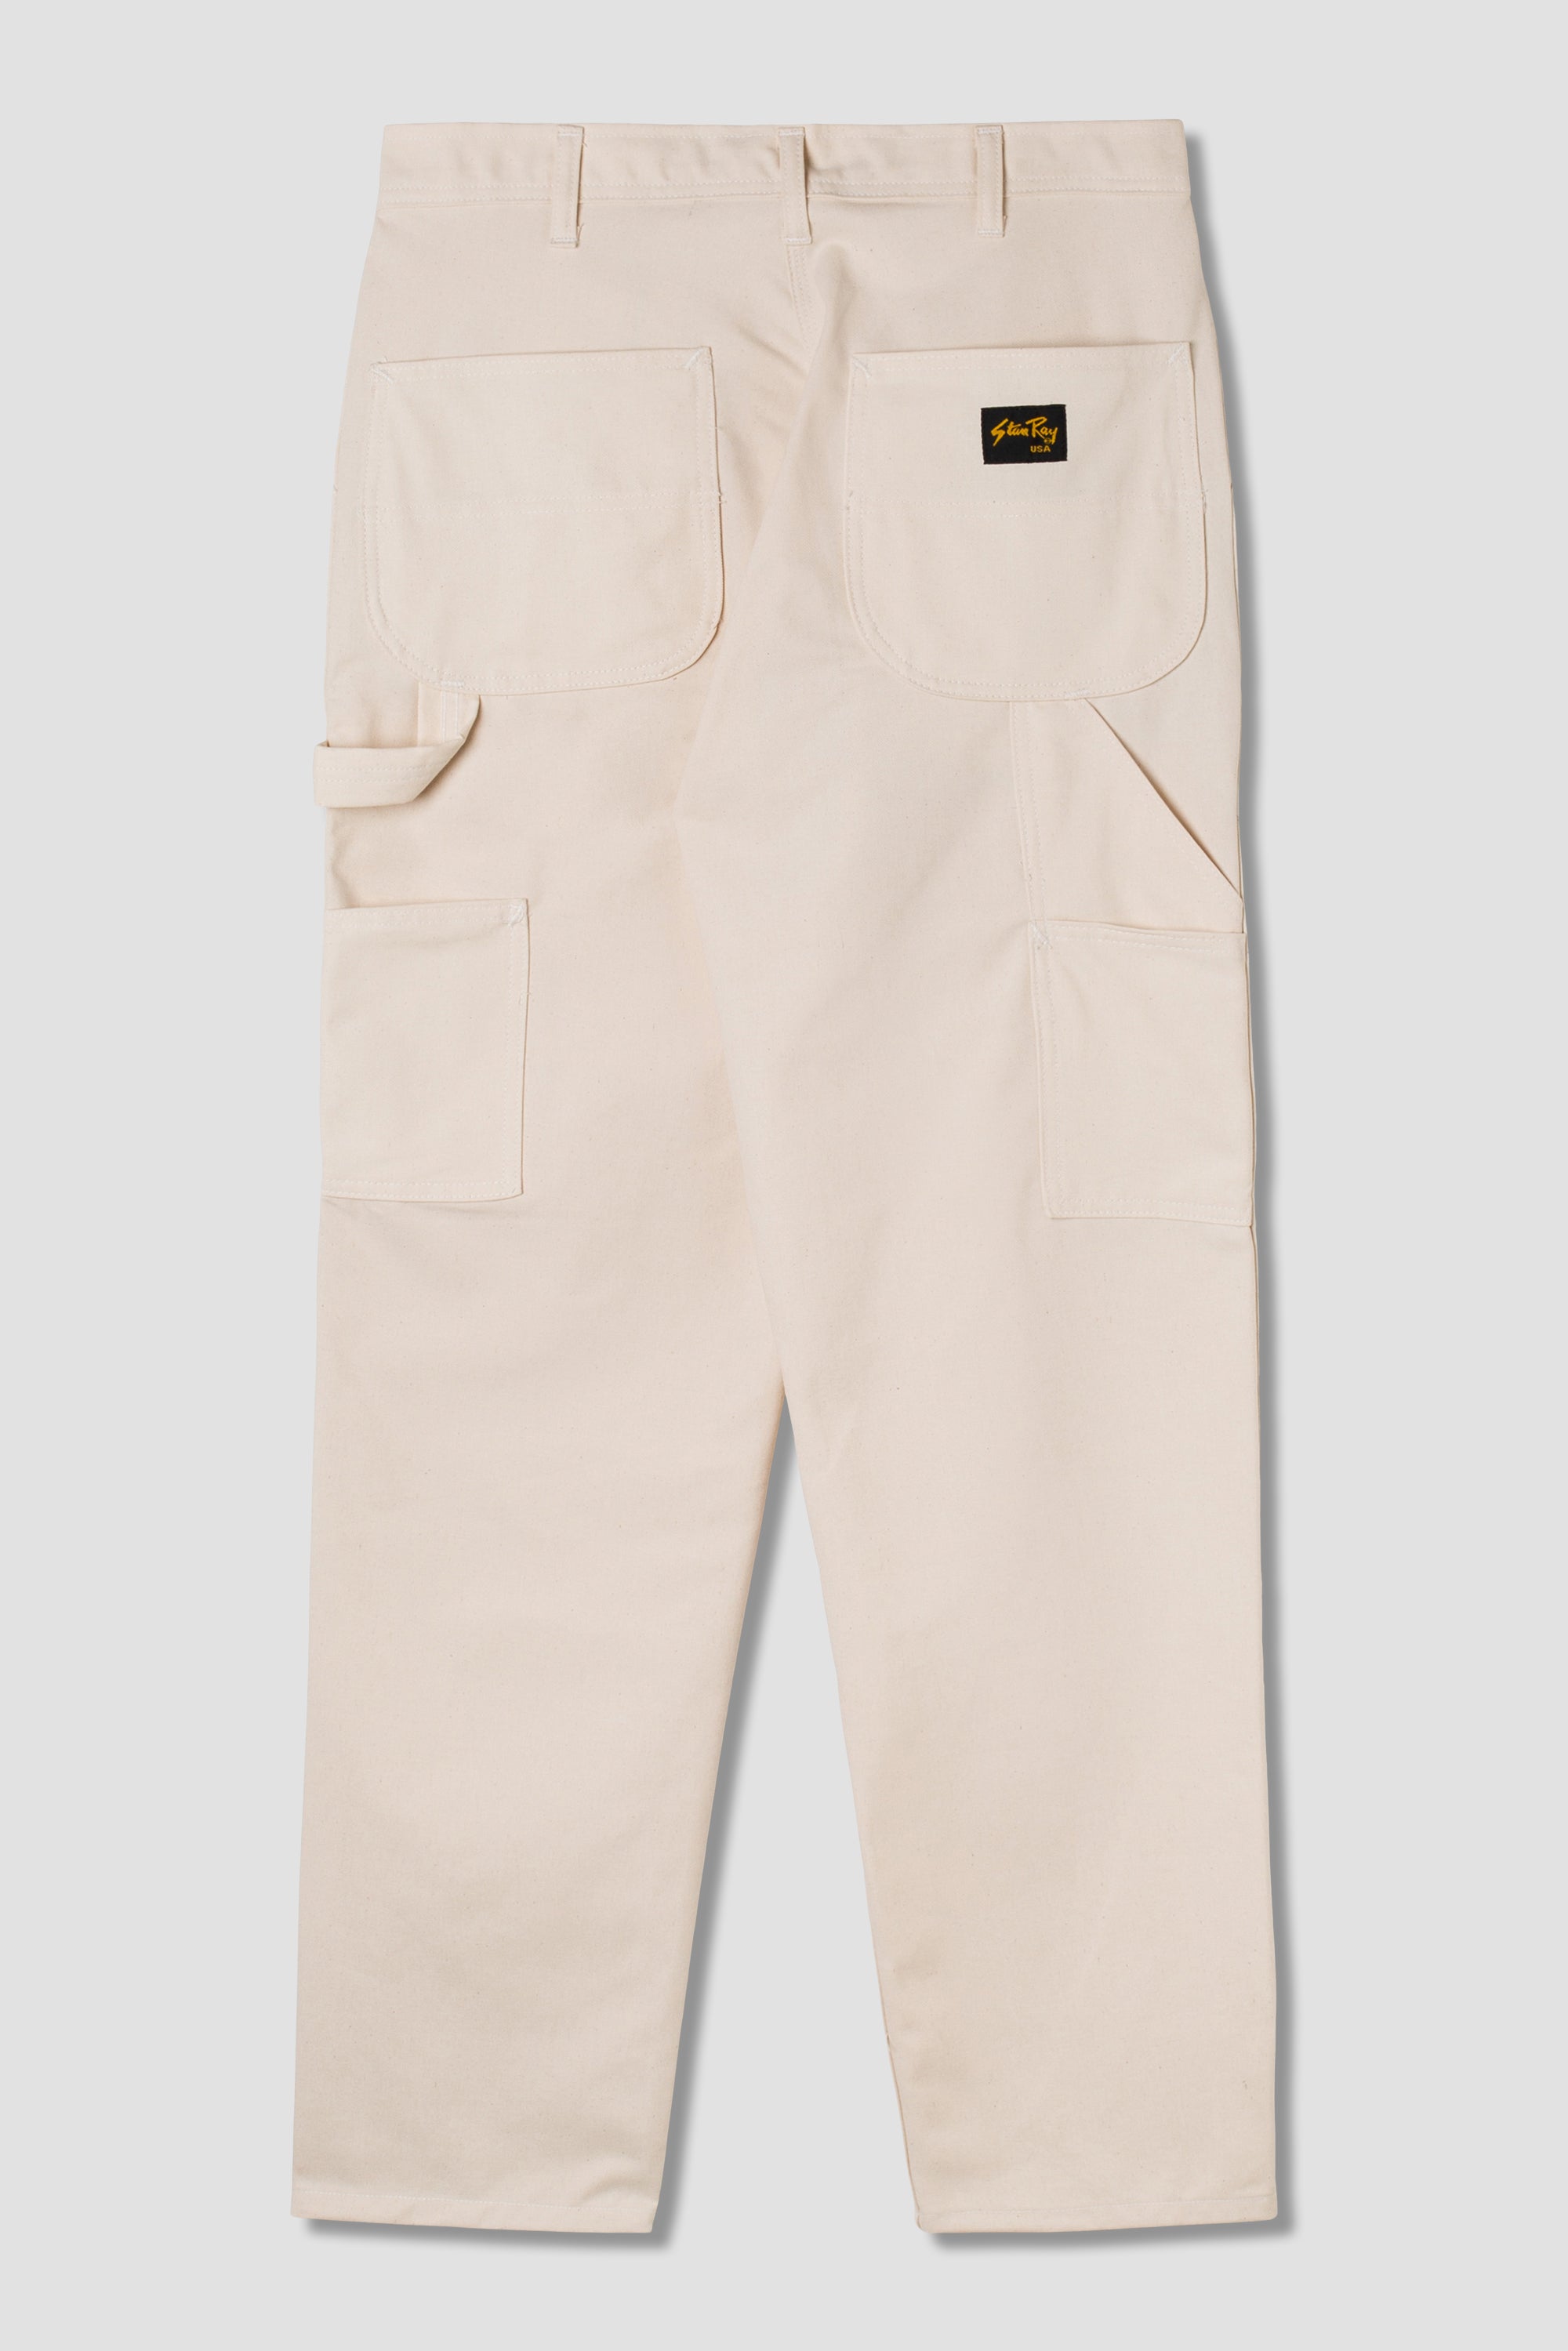 Dassy Helix Painters Stretch Trousers | Granite Workwear